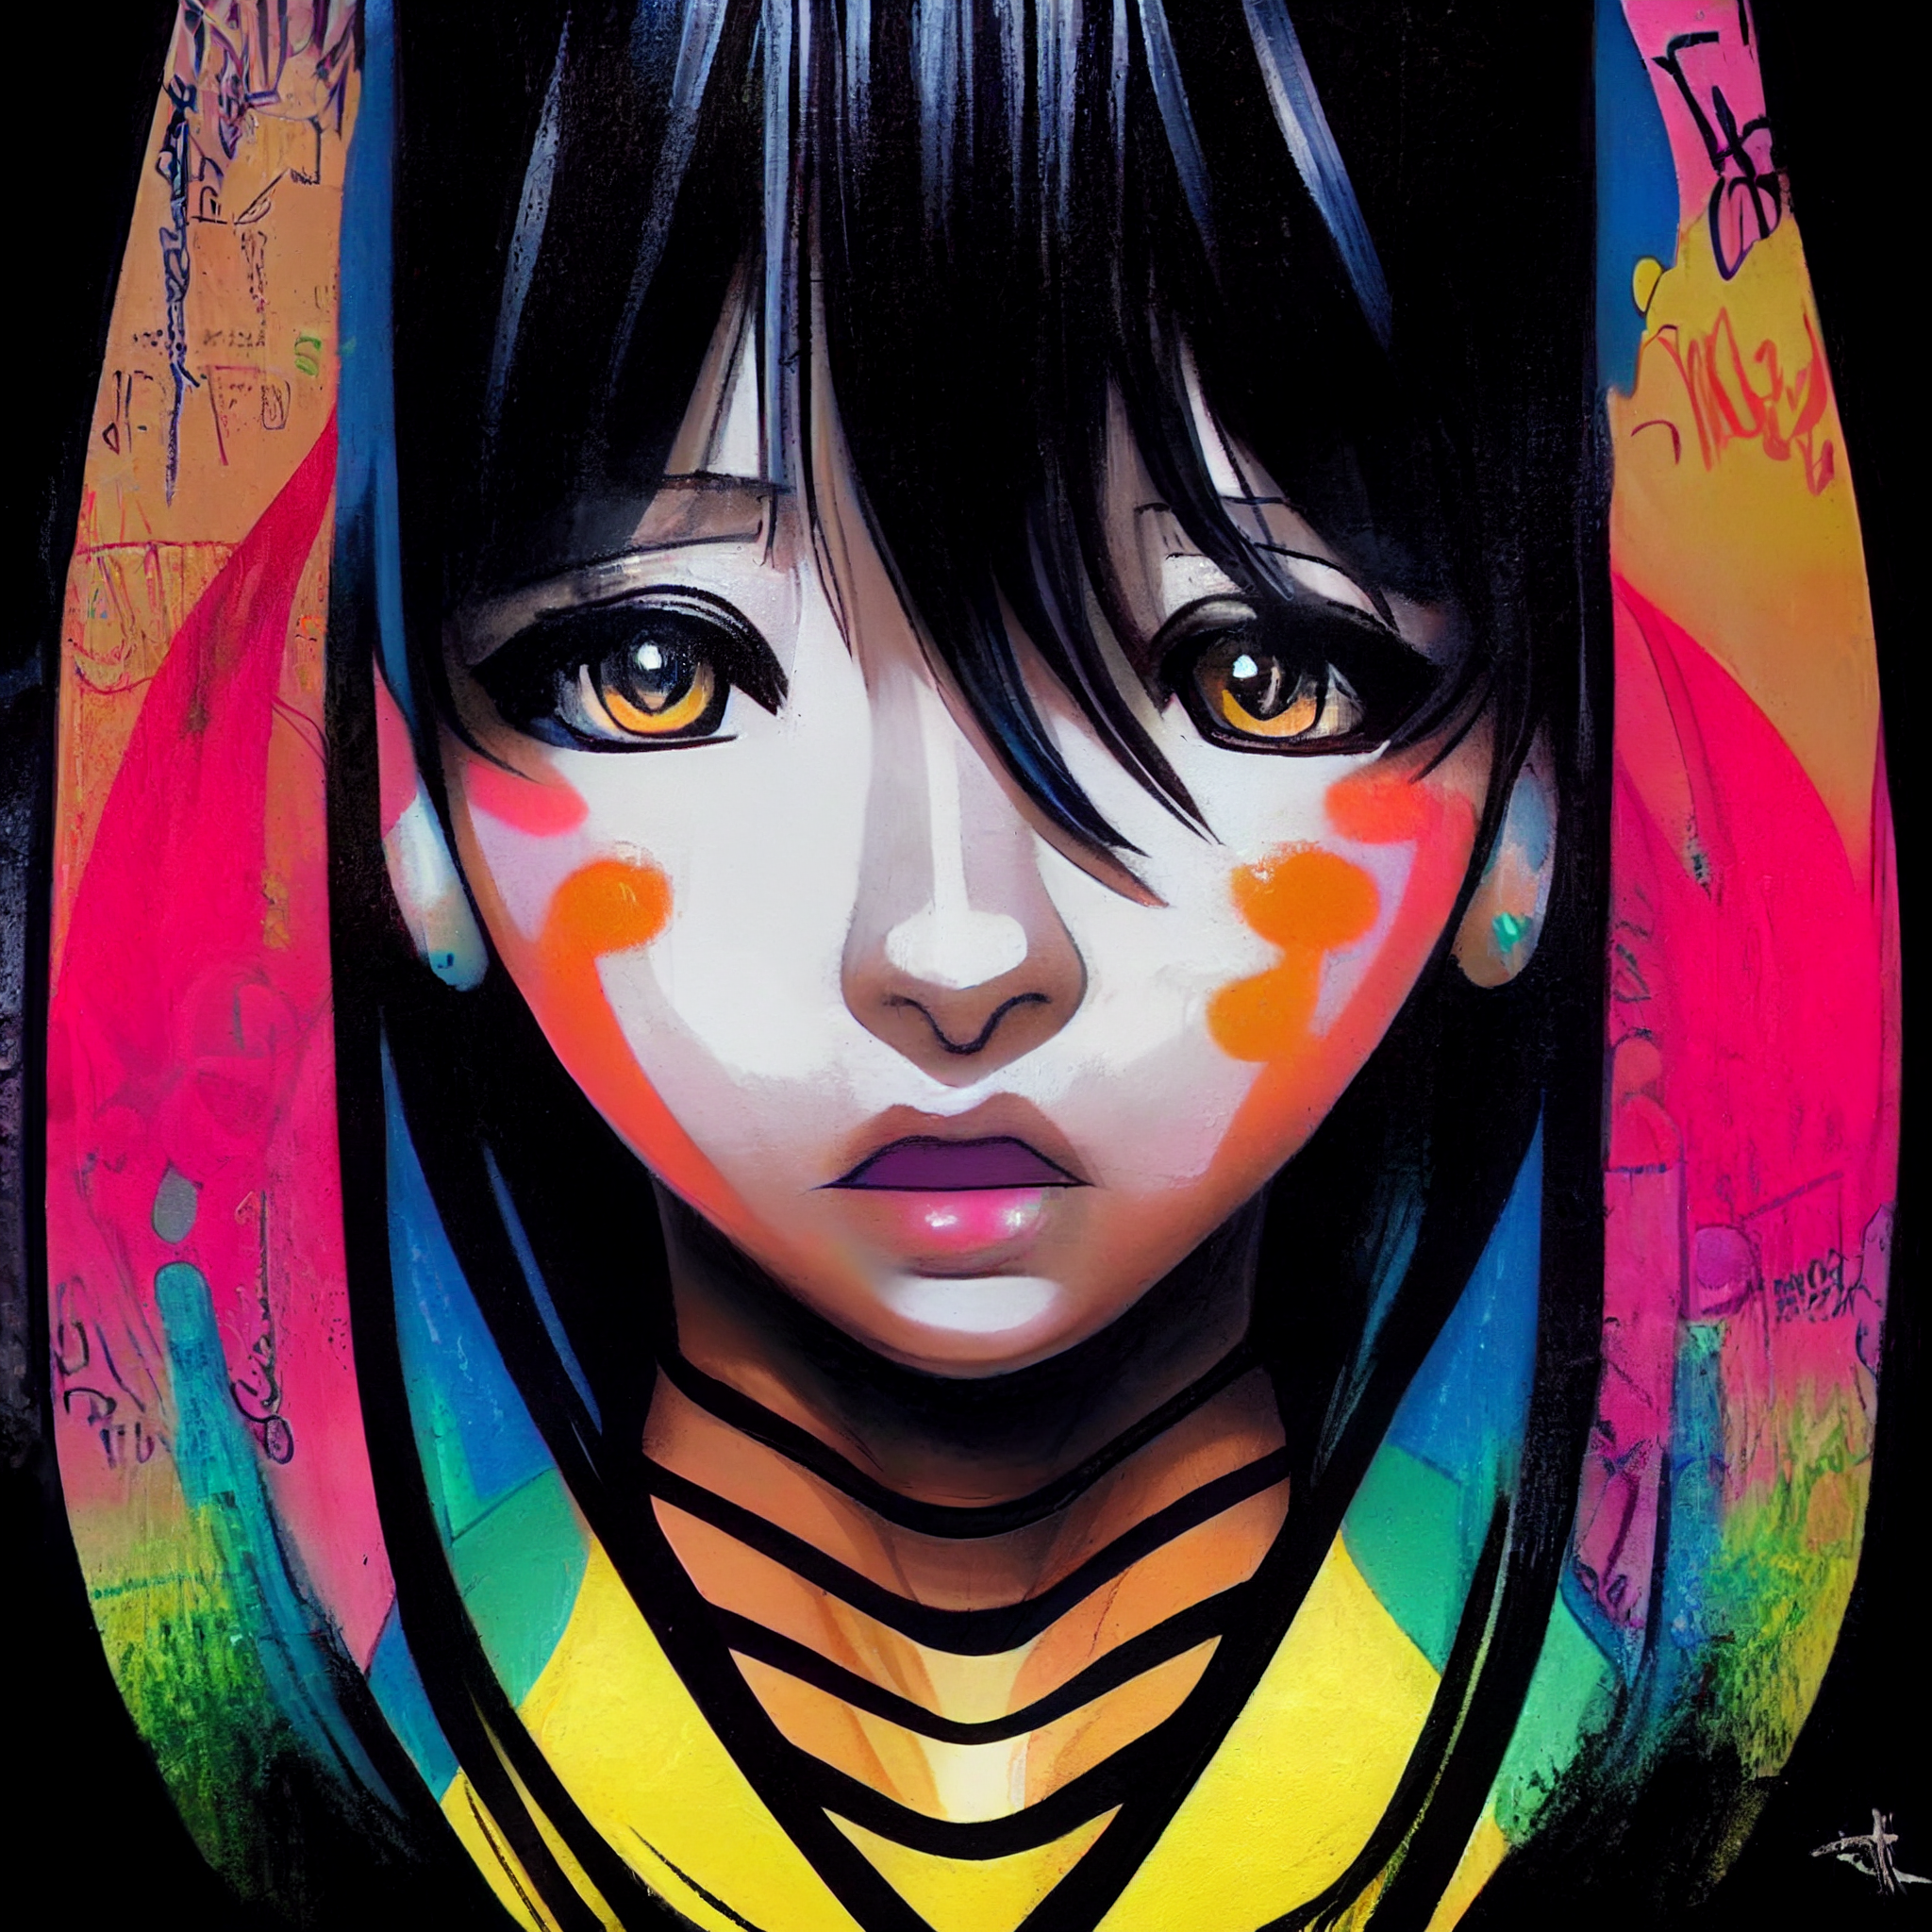 510 Anime Graffiti Stock Photos Pictures  RoyaltyFree Images  iStock